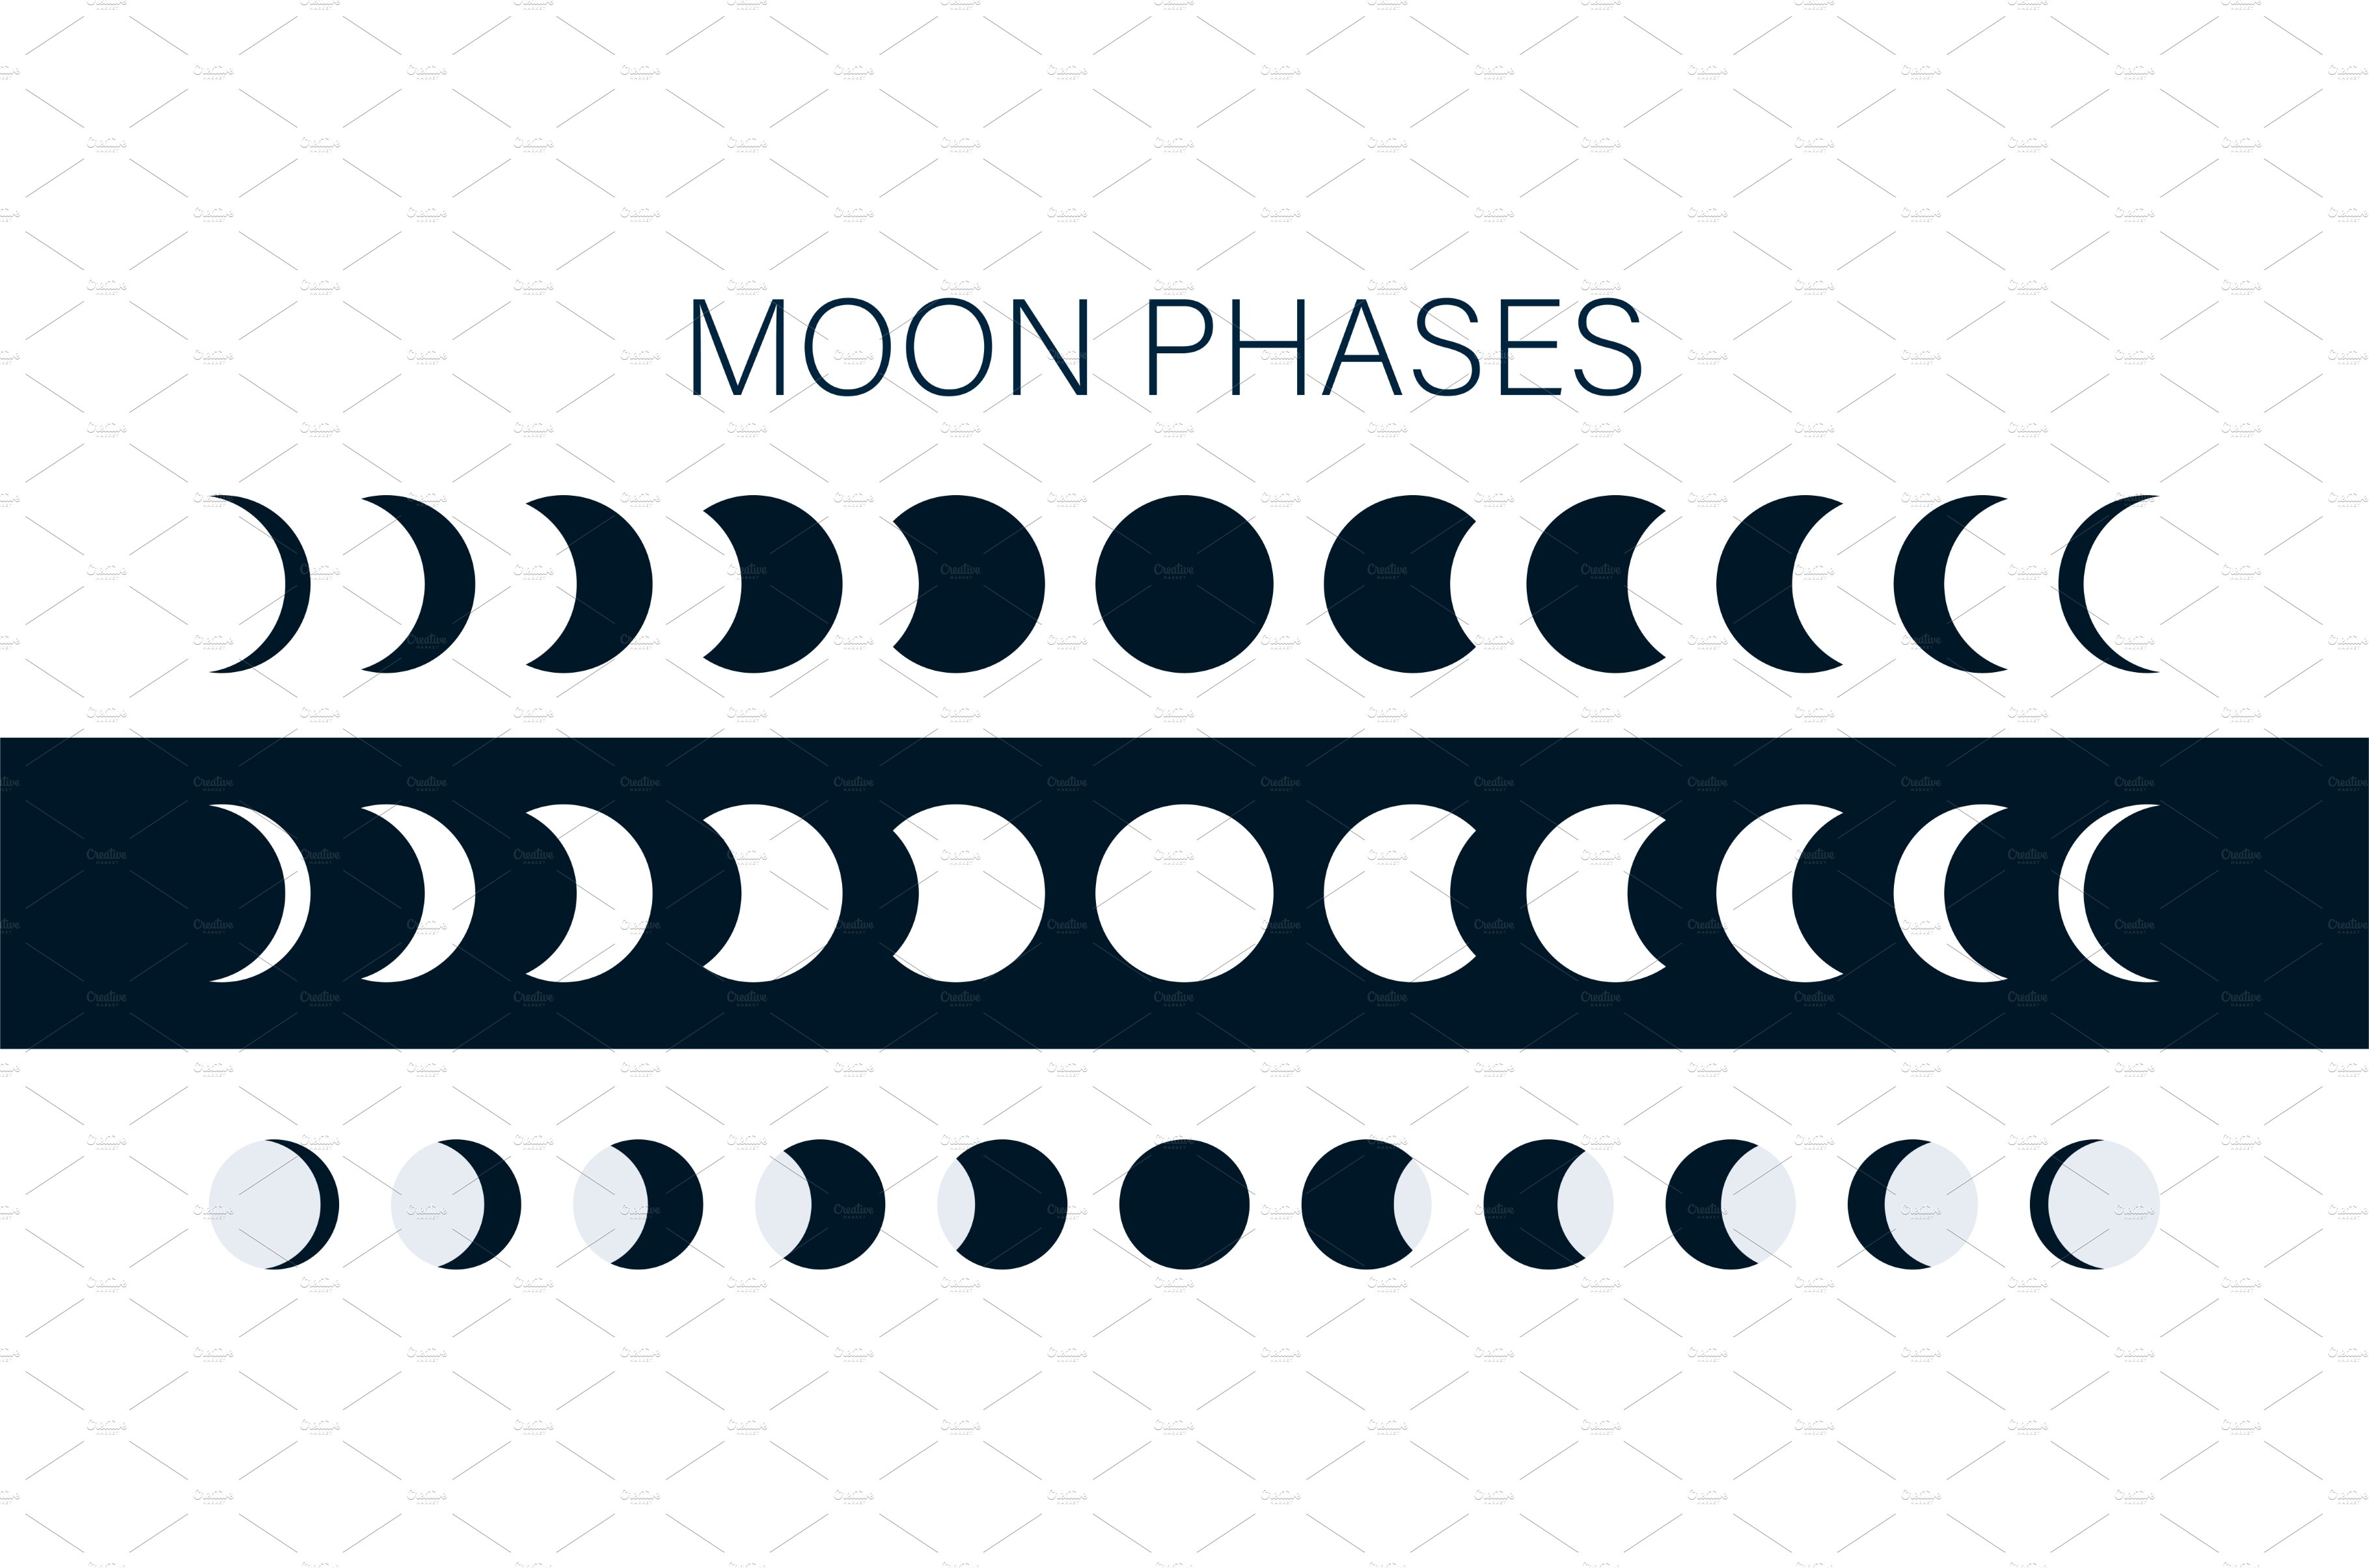 Moon phases astronomy icon set cover image.